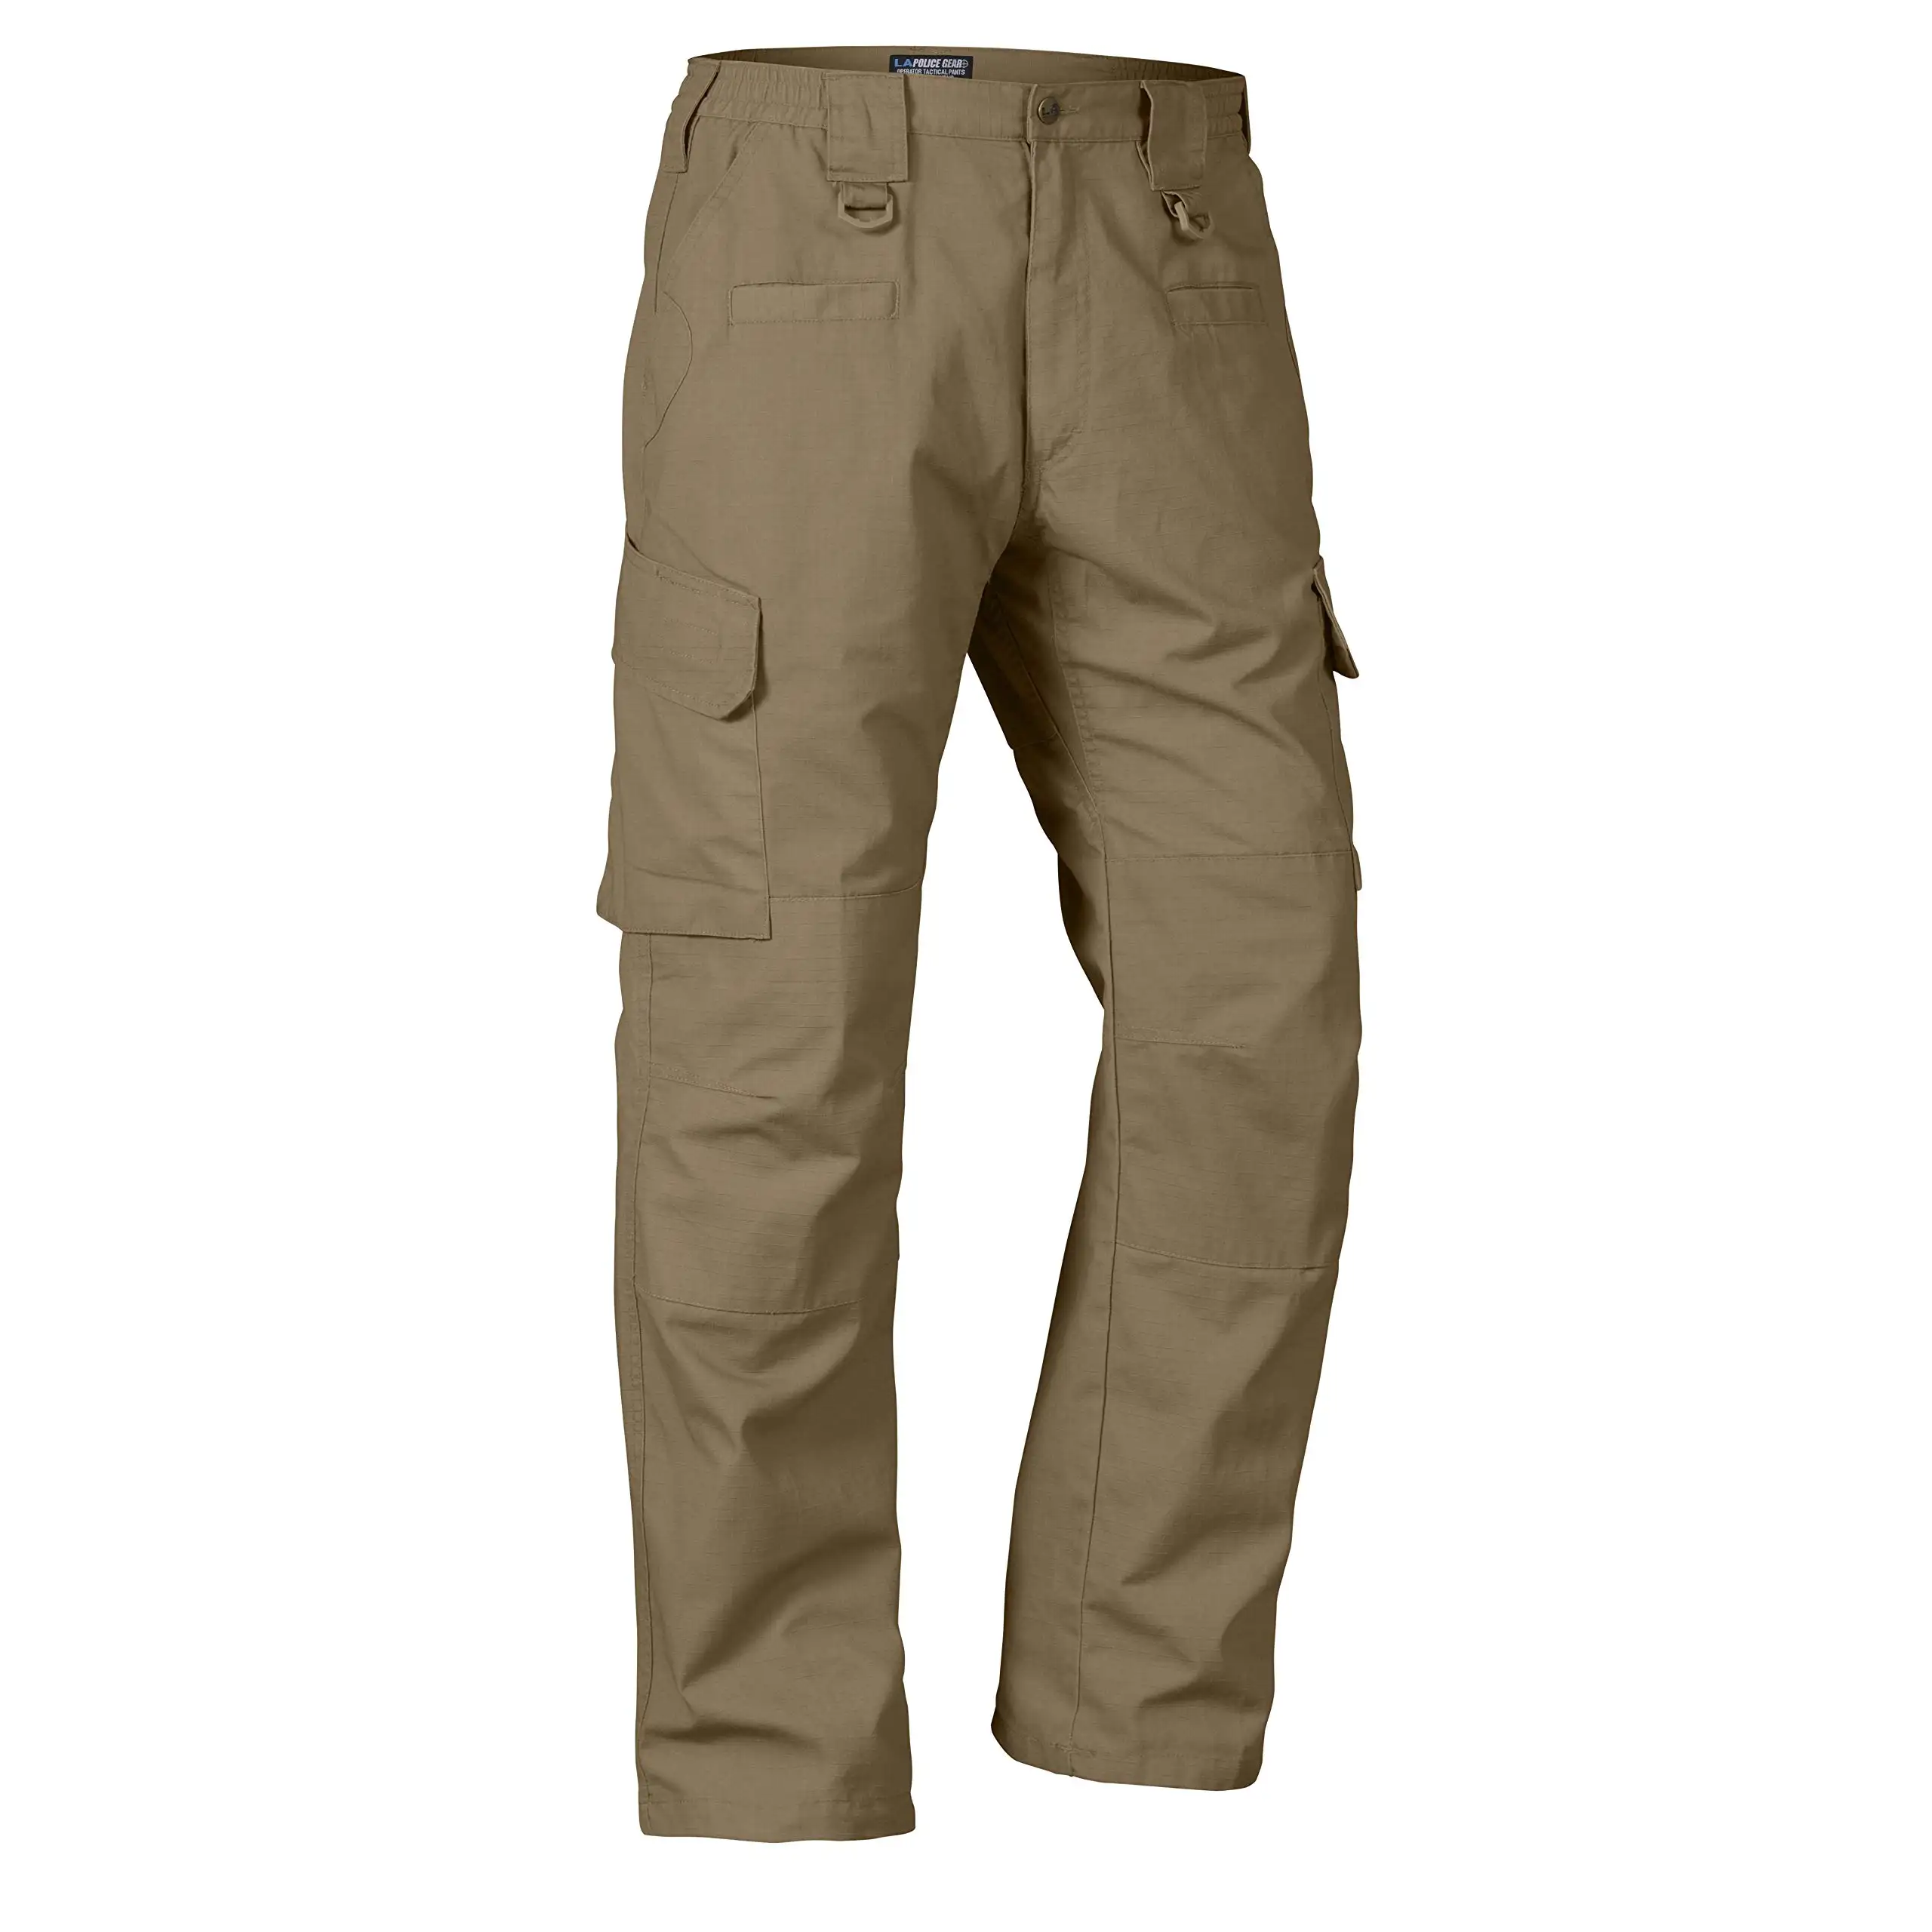 High Quality Army Green Multi-pocket Work Trousers 6 Pocket Plain Nylon Tactical Cargo Pants For Men